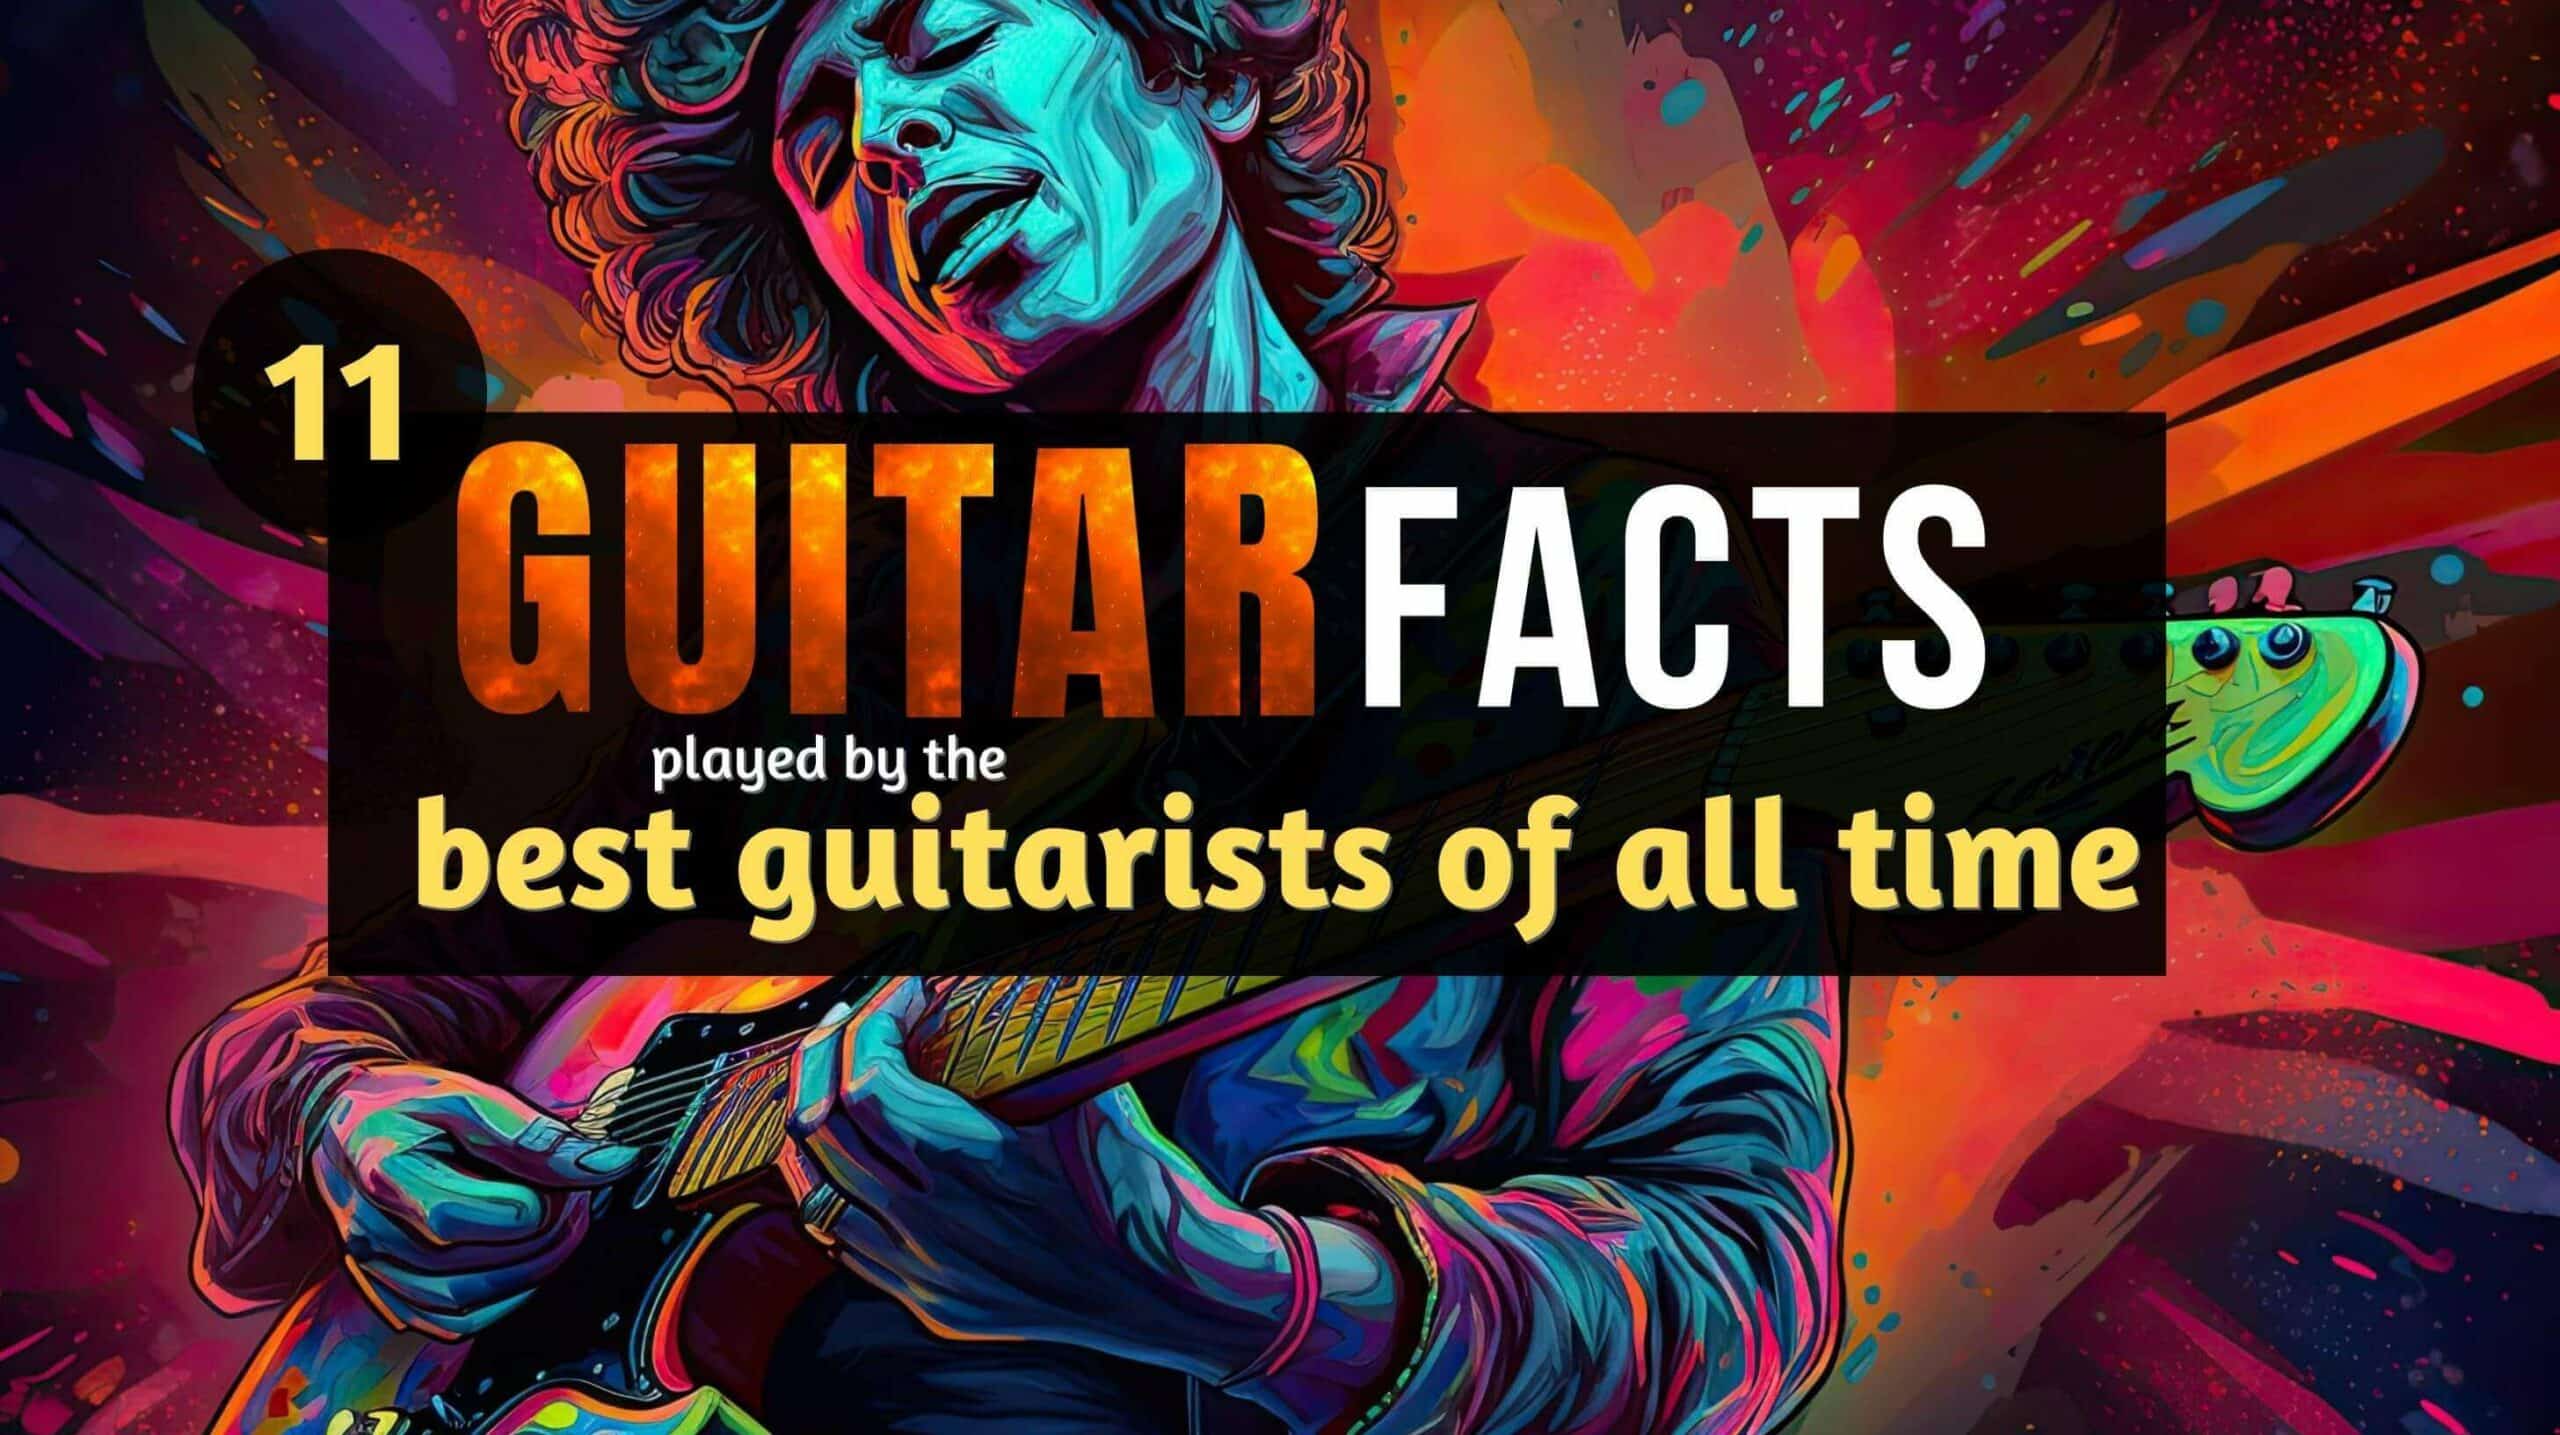 A person playing an electric guitar, considered one of the best guitarists of all time